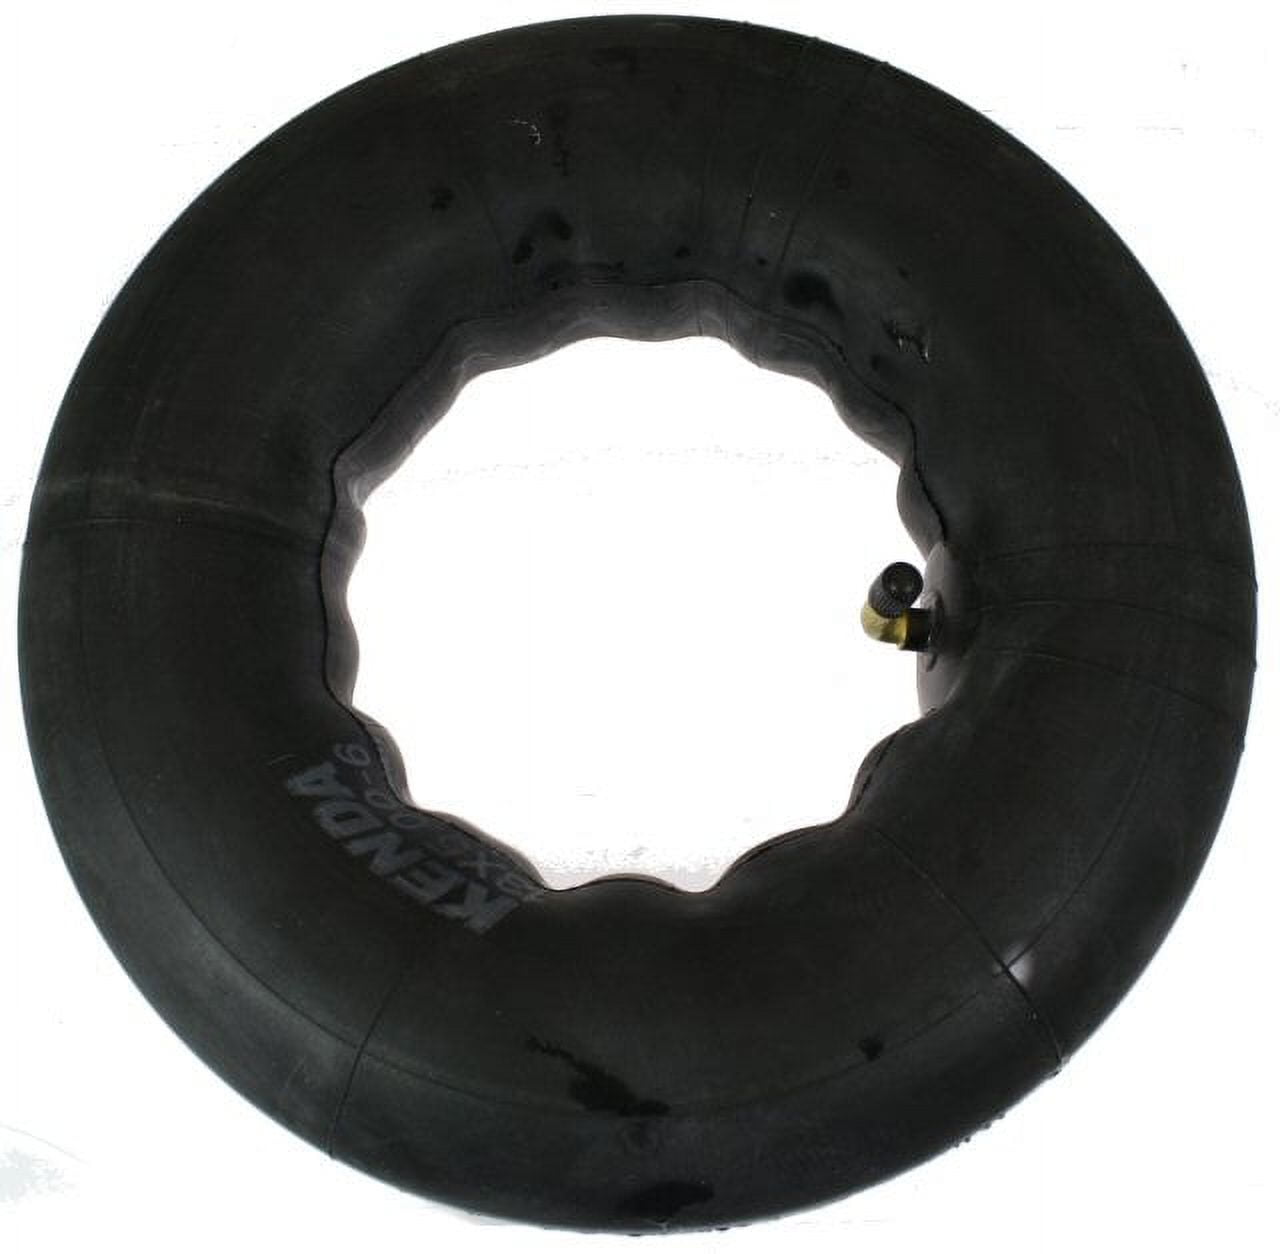 Rippin Moto 2.75/3.00-19 Heavy Duty Inner Tube (70/100-19) 2.5mm Thick -  TR4 Valve - Fits Most 3.0-19 Motocross Tires, Surron Light Bee X, Talaria  and